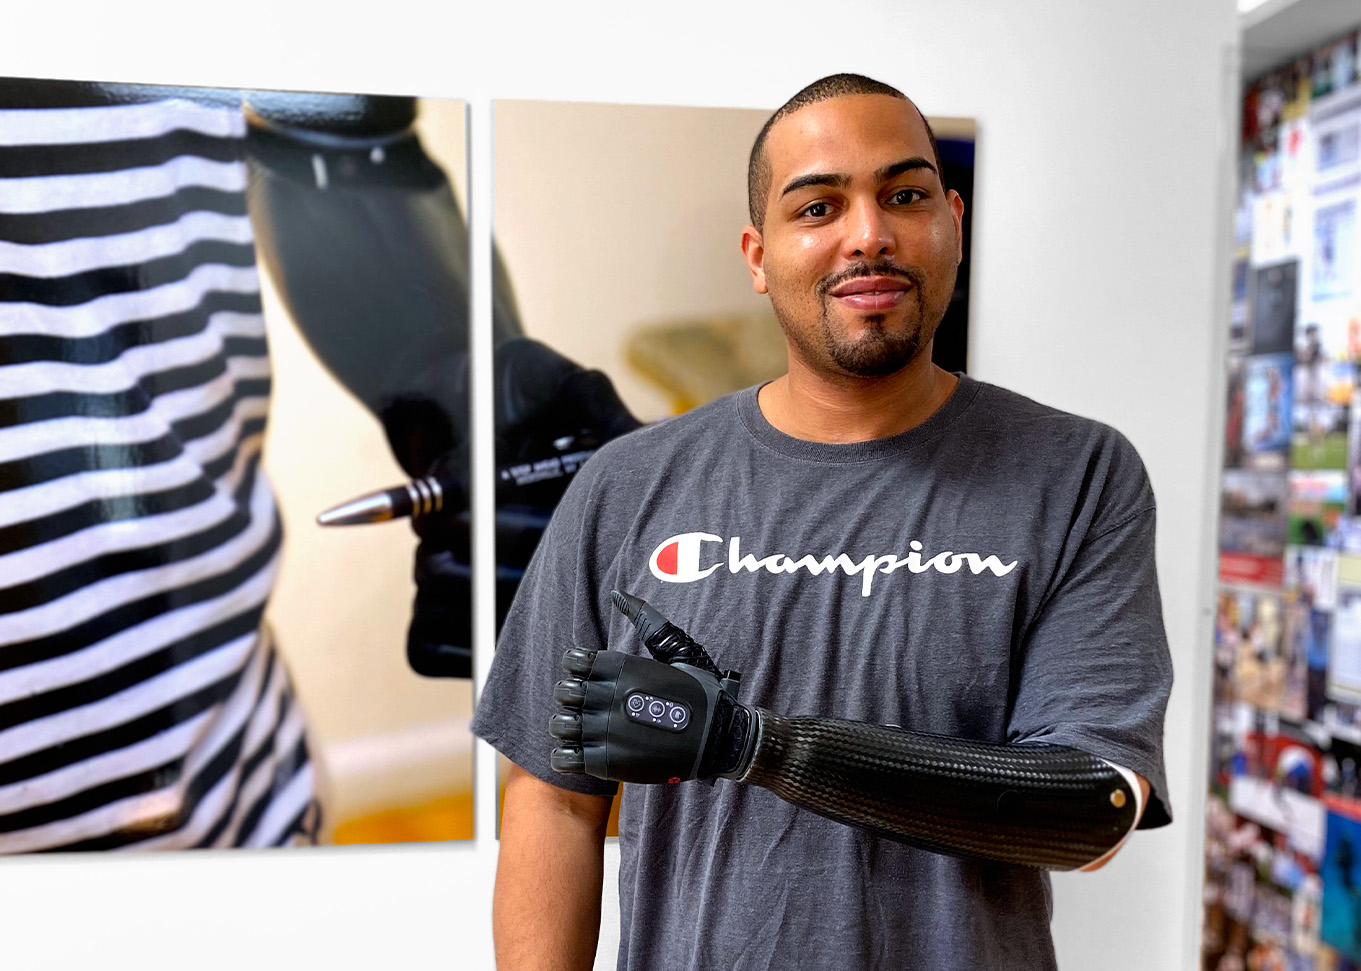 articulating prosthetic arm for below elbow amputee